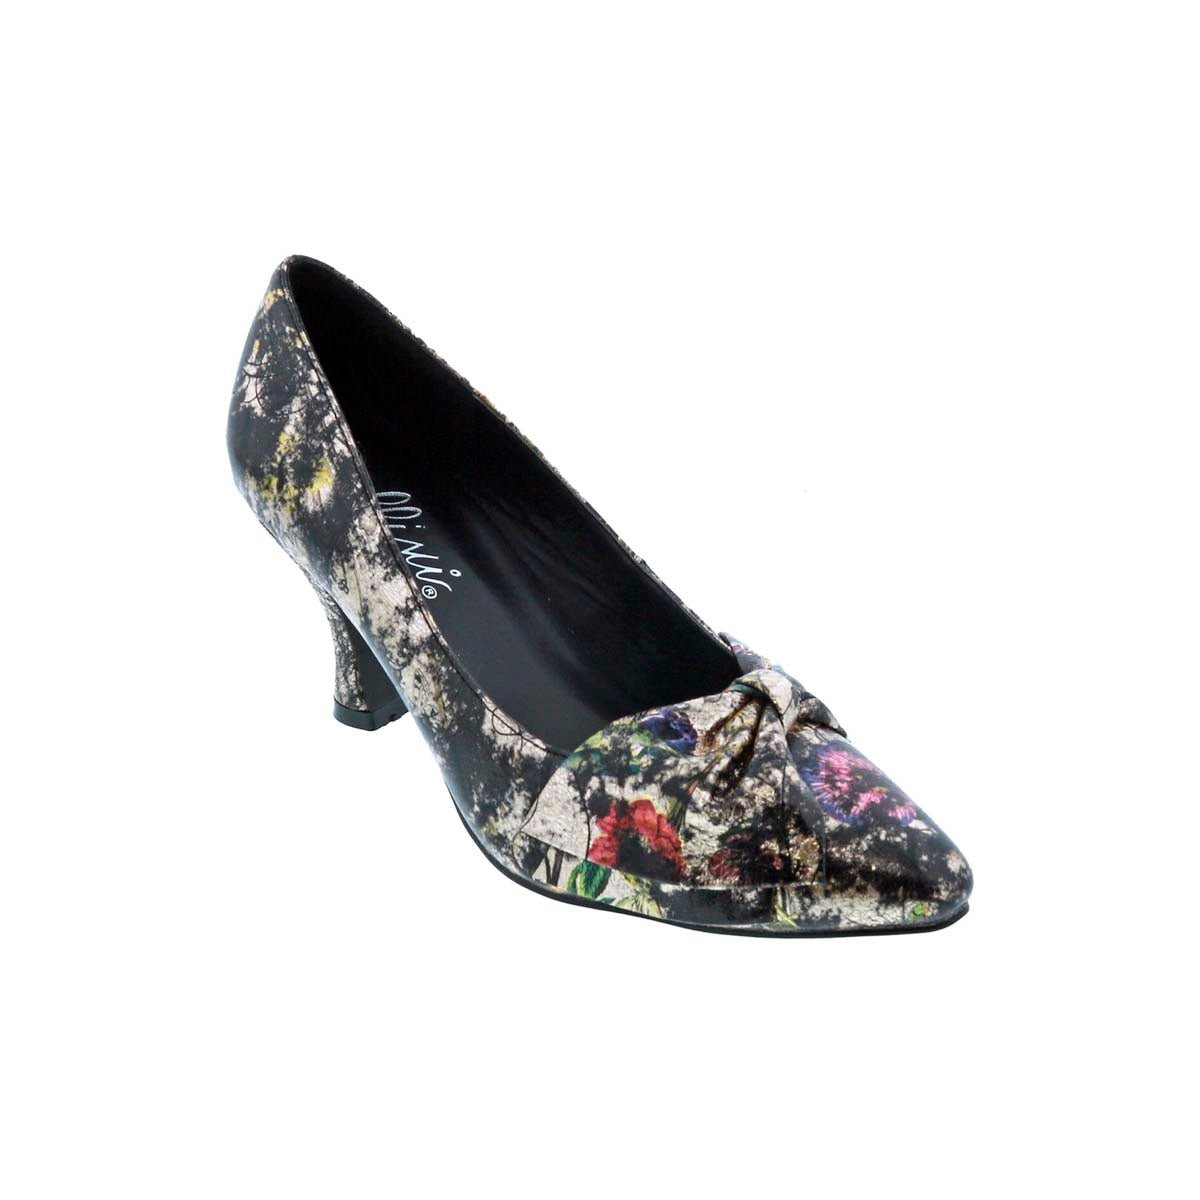 BELLINI CHARM FW WOMEN PUMP SHOES IN BLACK FLORAL - TLW Shoes